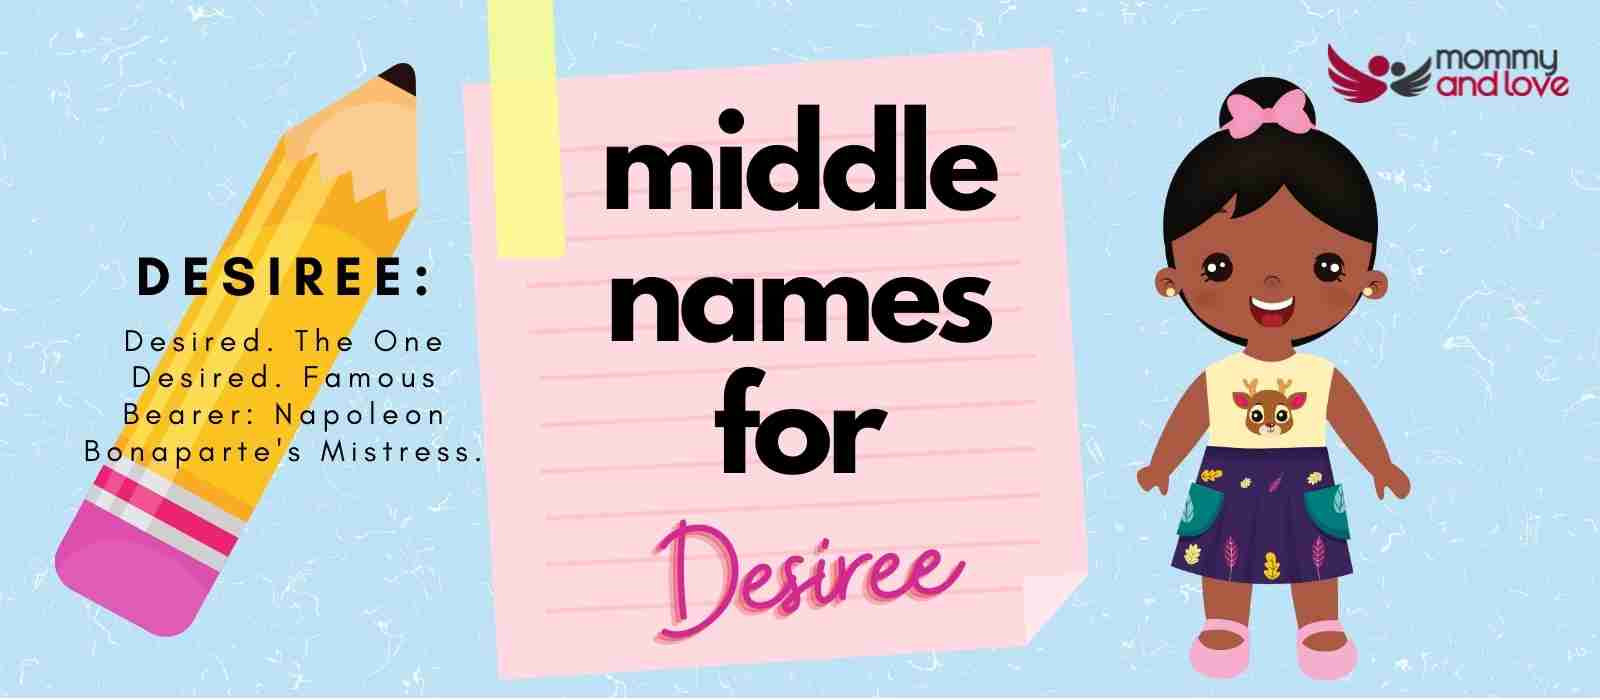 Middle Names for Desiree